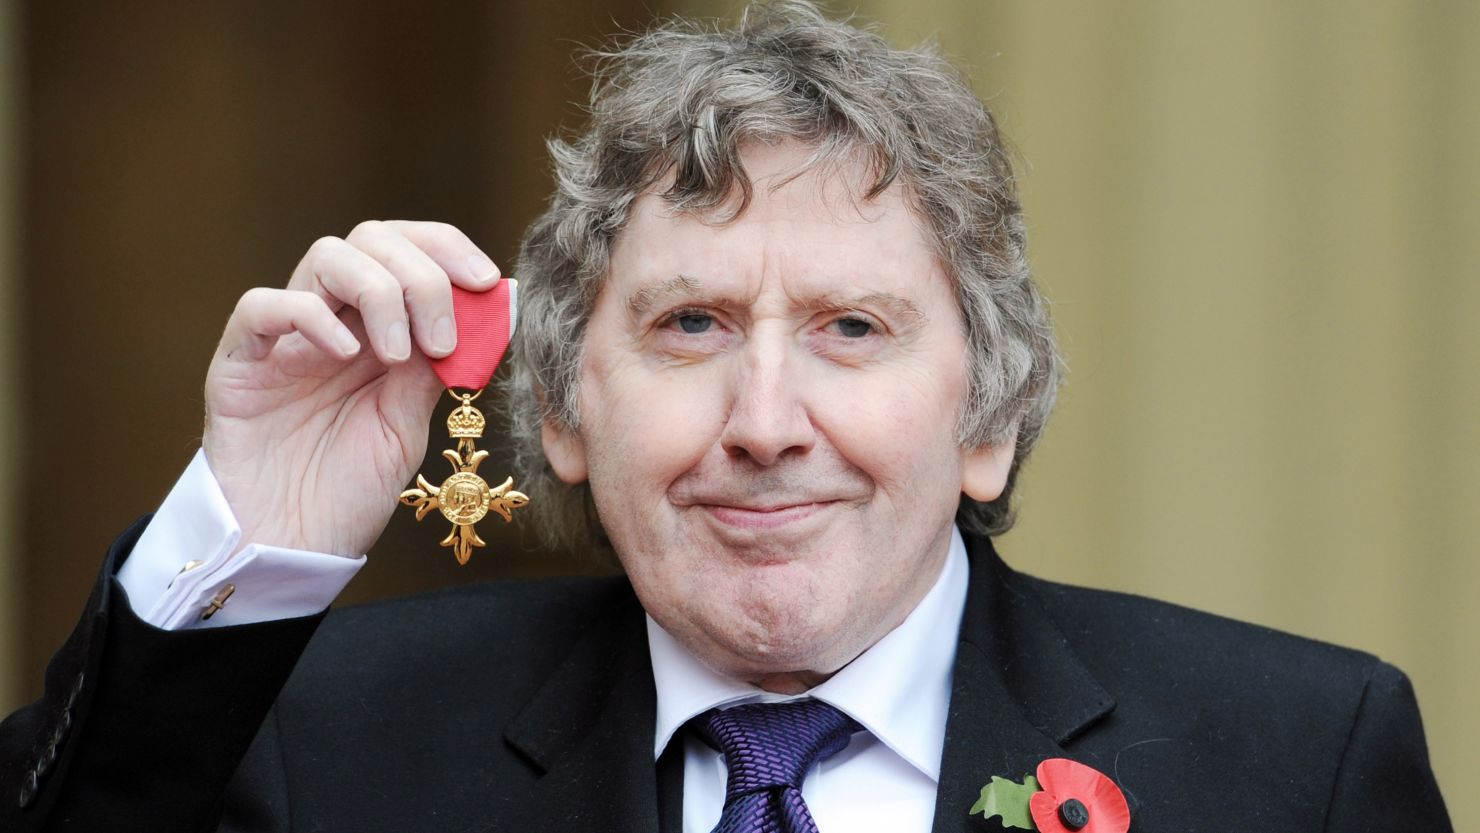 James Herbert with his OBE medal which he received from Prince Charles at Buckingham Palace on October 29, 2010 in London.